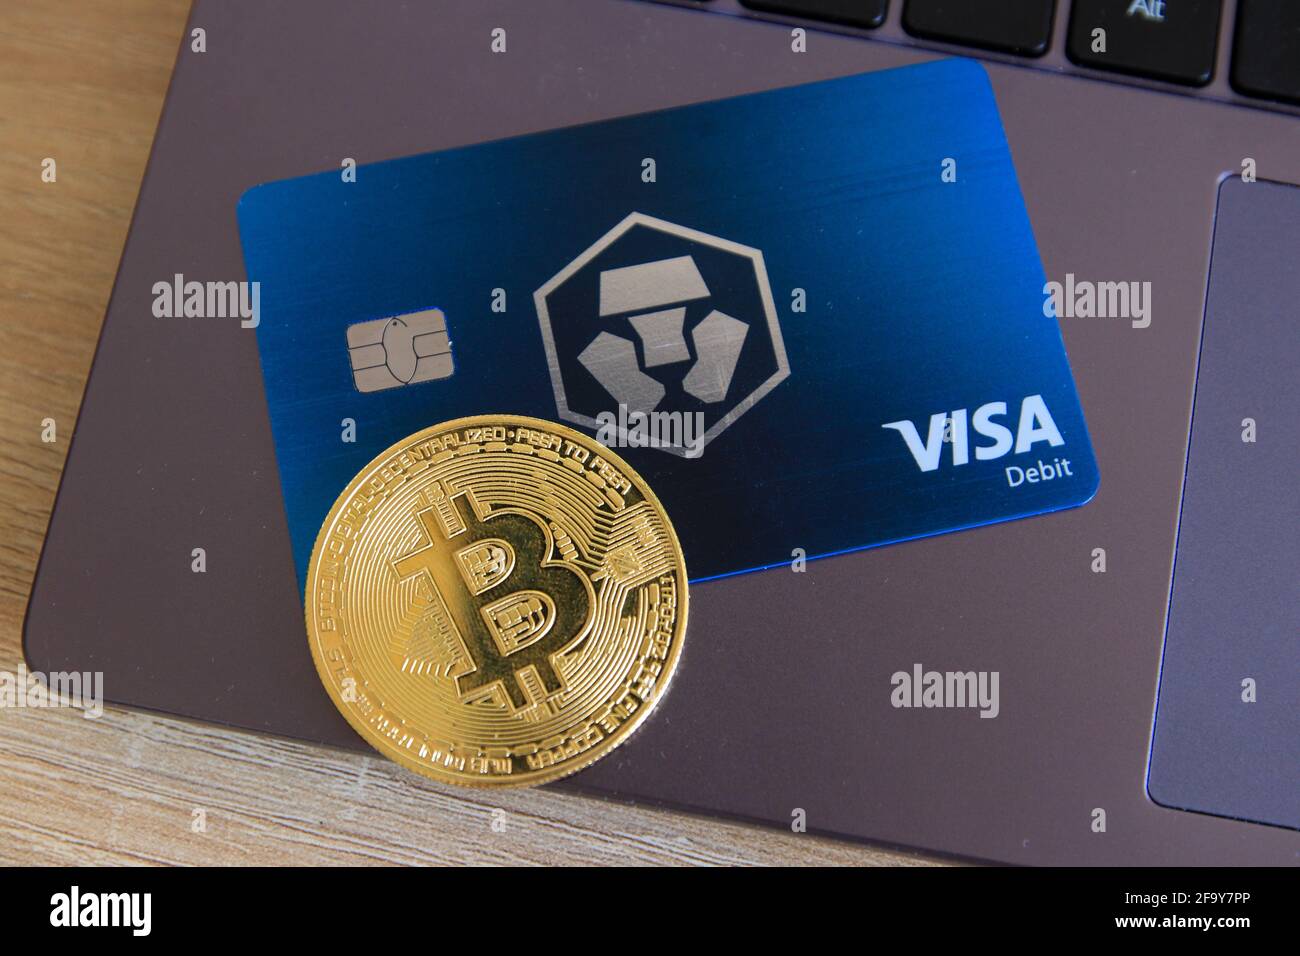 Berlin, Germany - April 21, 2021: Crypto.com Midnight Blue Visa card and a bitcoin currency lying on laptop. Crypto.com is a beginner-friendly crypto Stock Photo